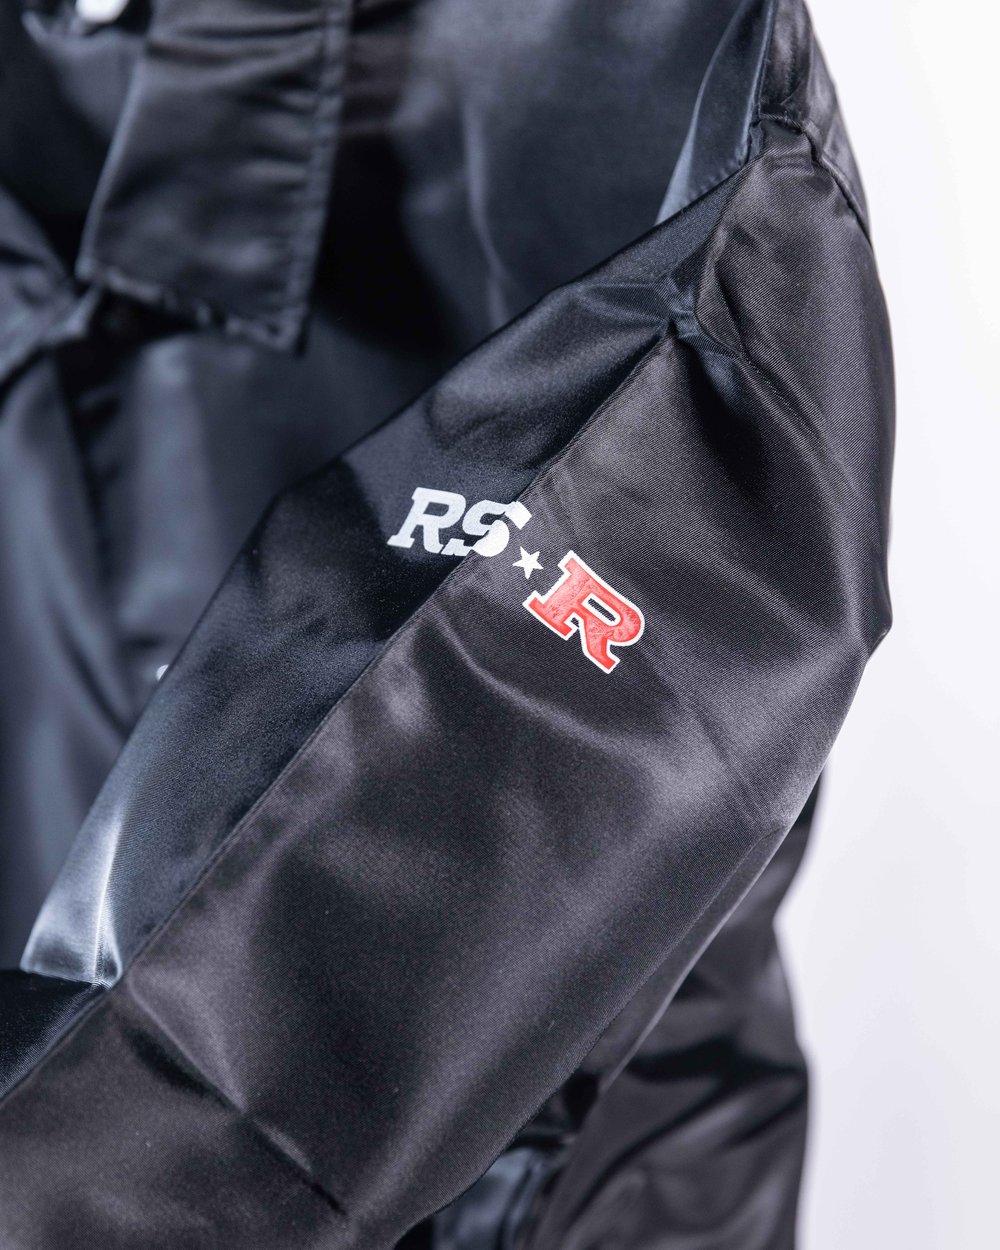 RS-R Coach Jacket (Extra Large)